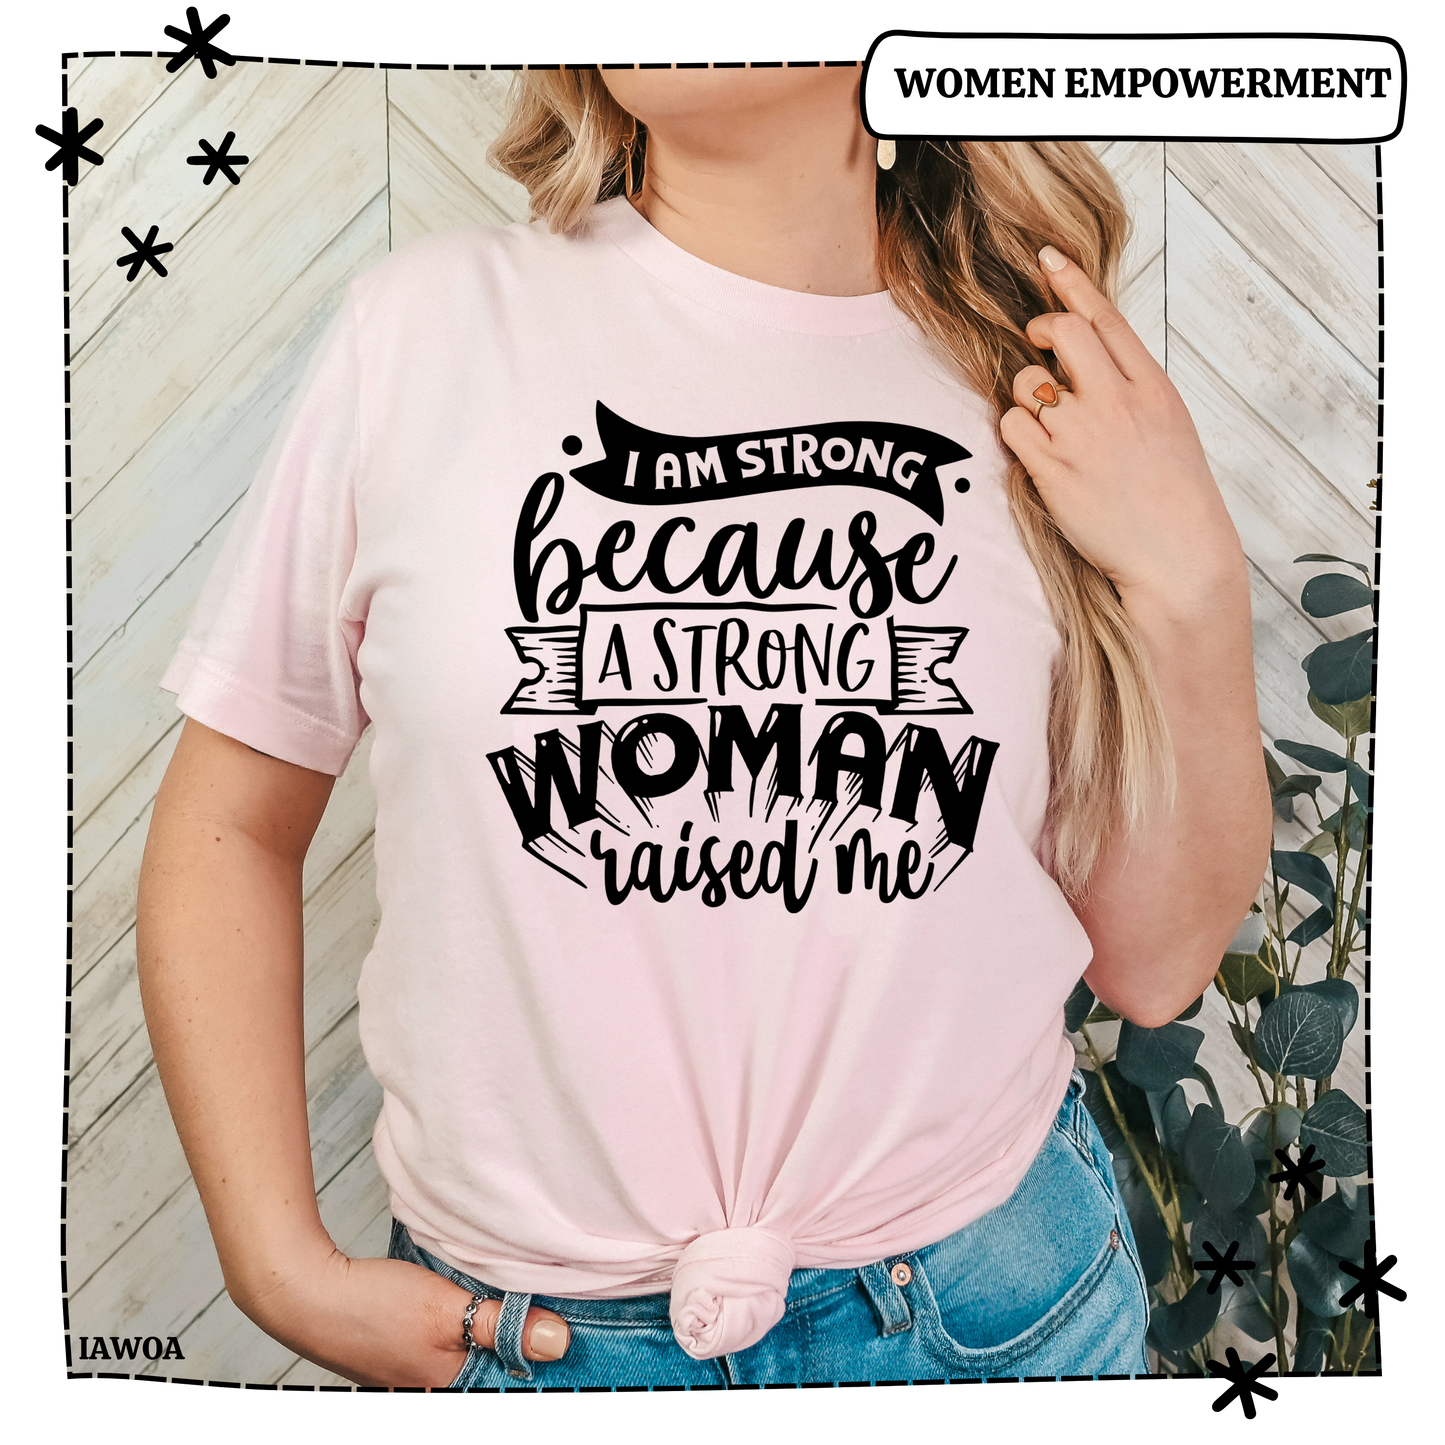 I Am Strong- Strong Woman Raised Me